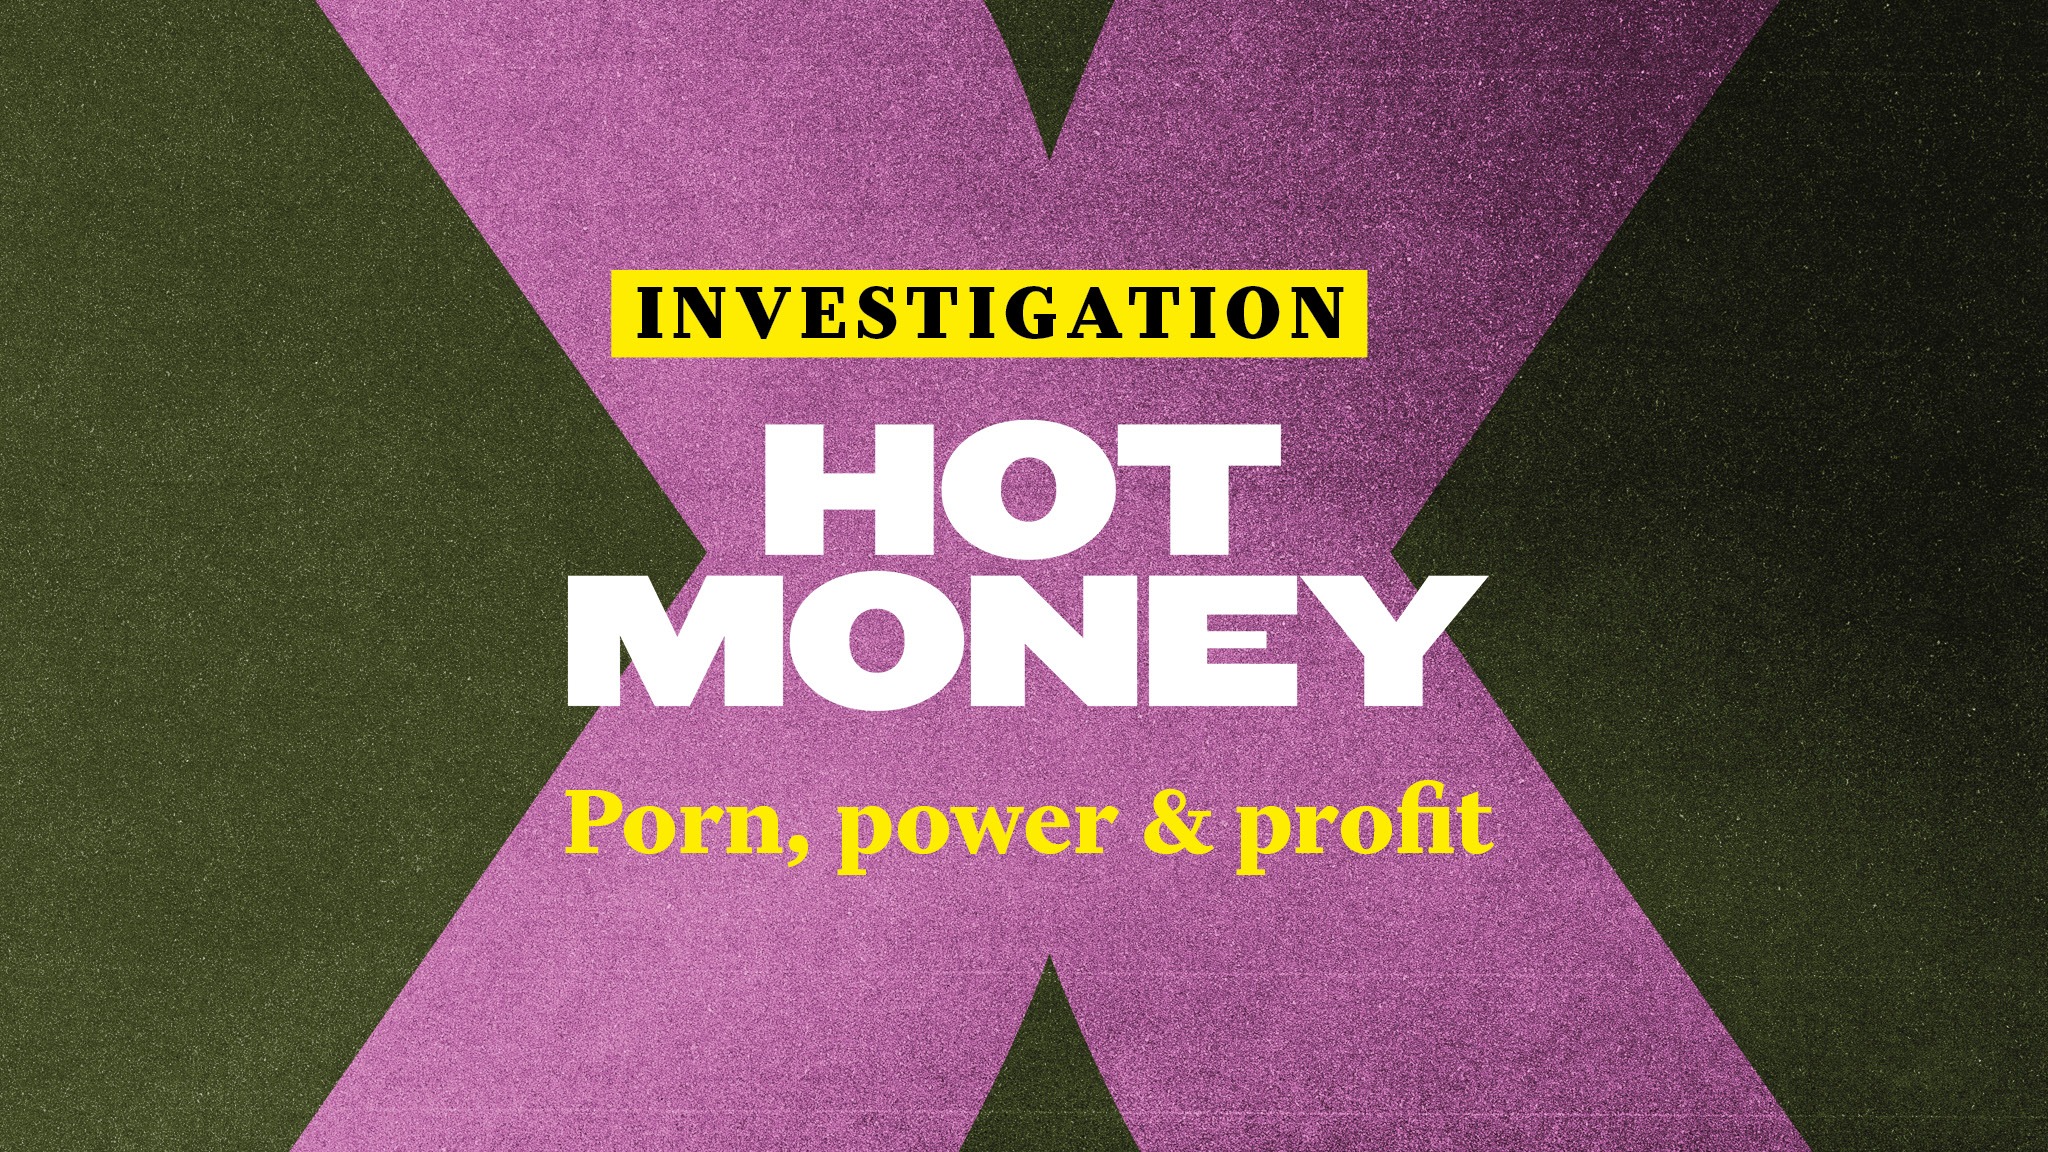 Xxx Video Hd Chaina - Hot Money: porn, power and profit | Financial Times